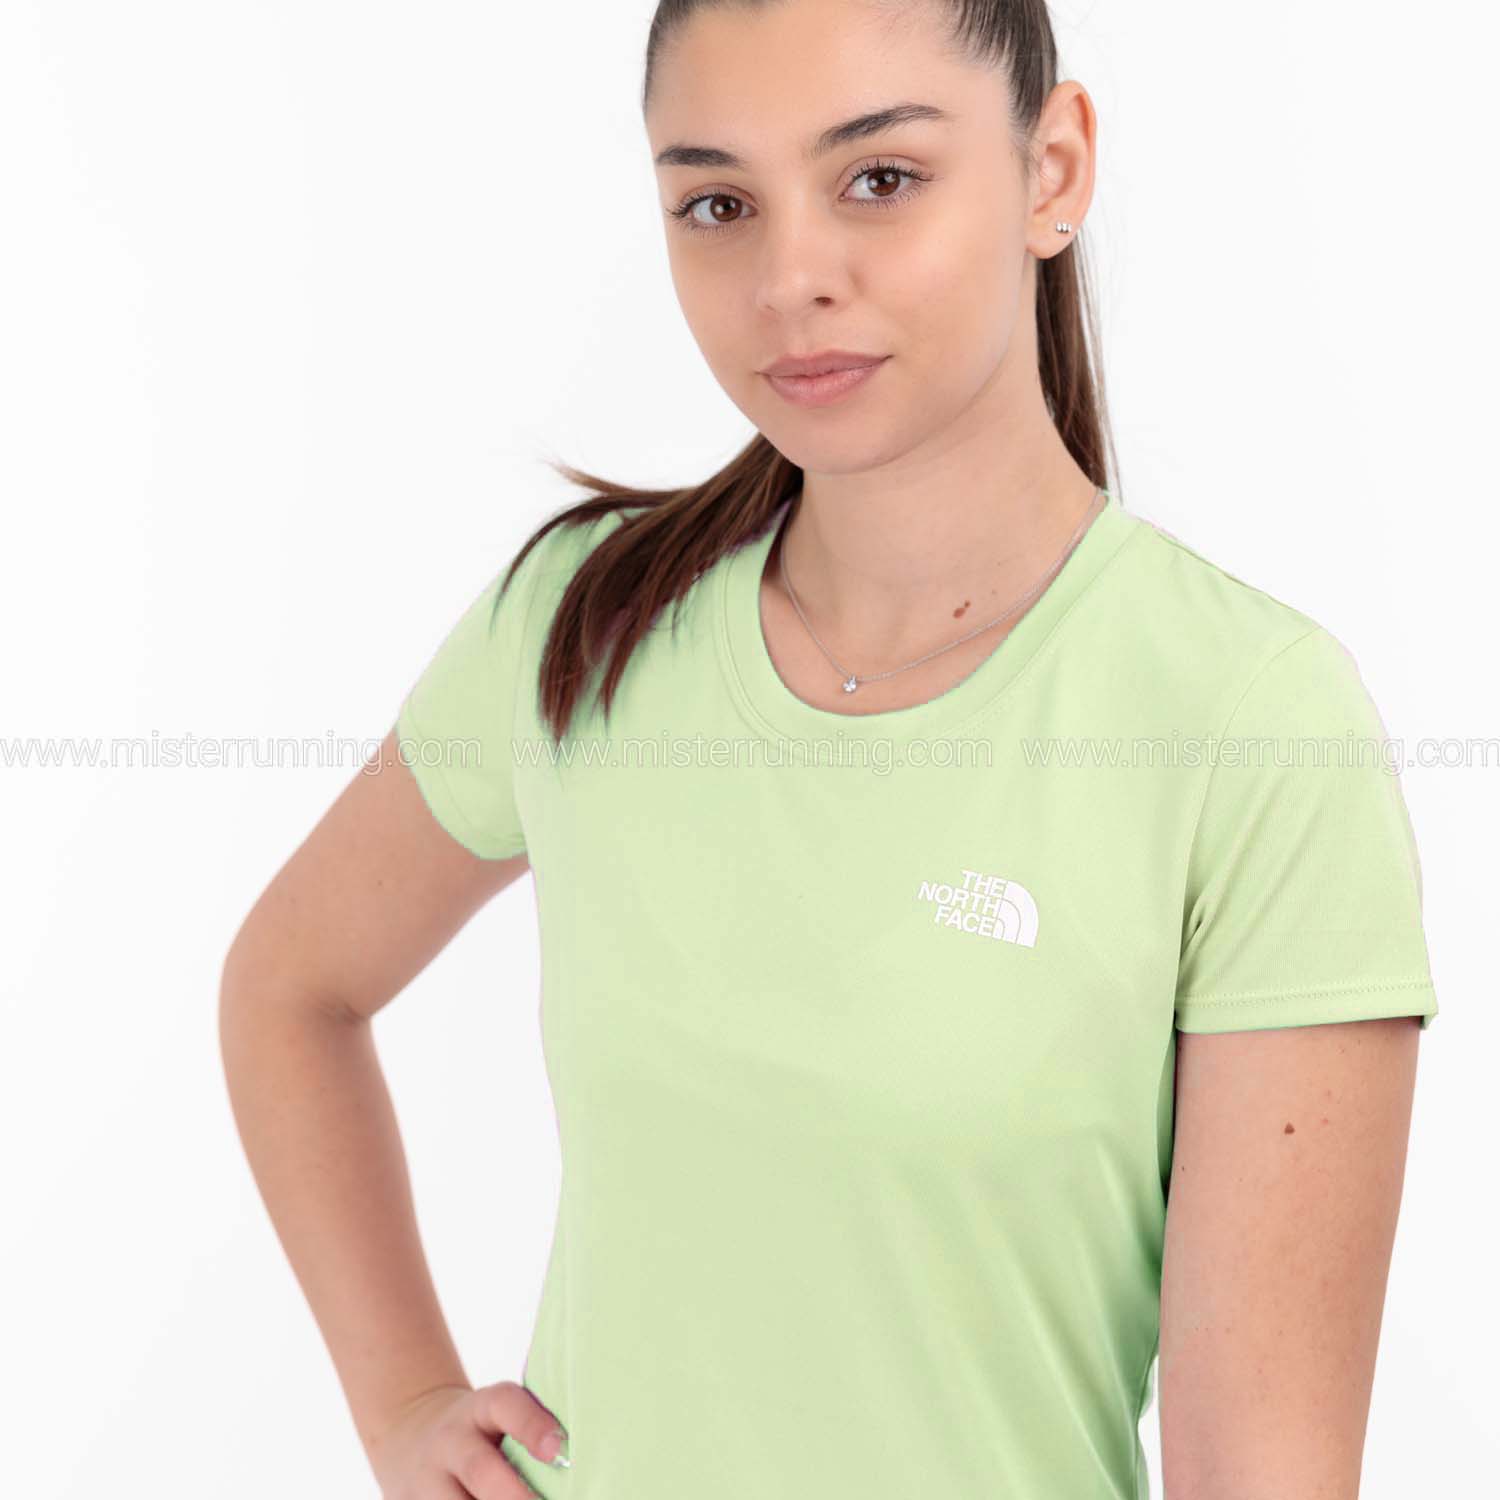 The North Face Reaxion Amp T-Shirt - Astro Lime Light Heathe